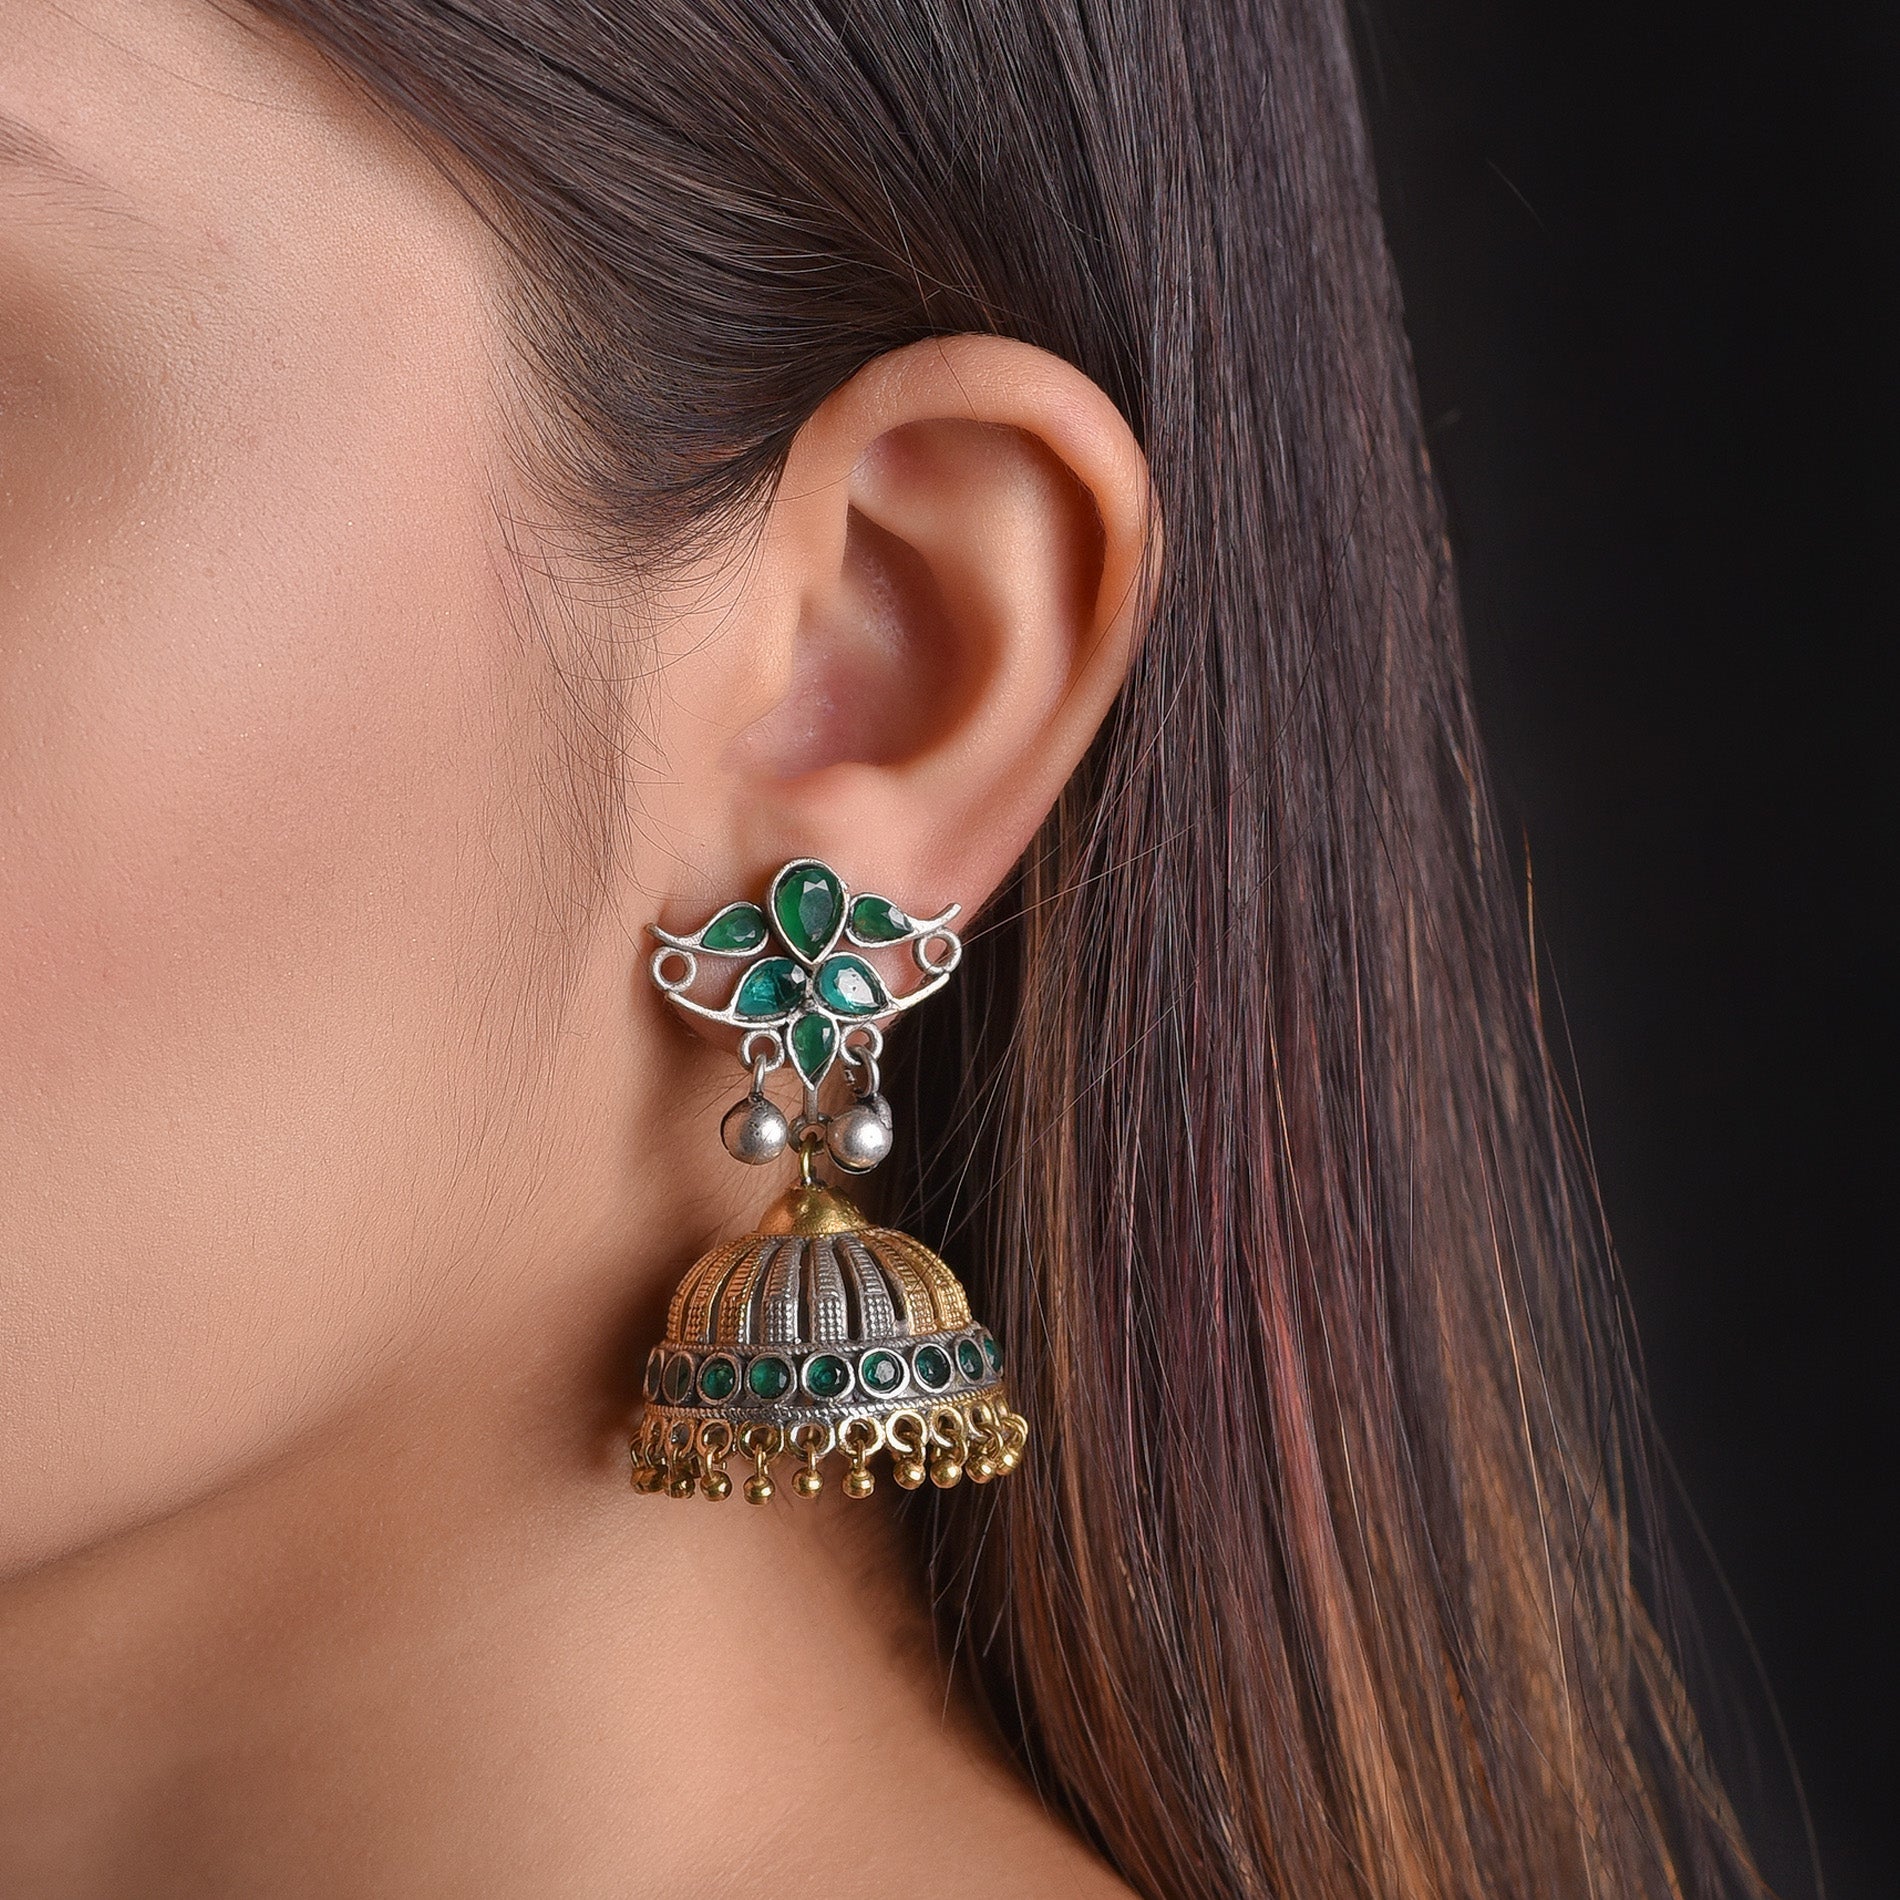 German silver oxidized Leaf Pattern Earring with Green Stone and Dual-Tone Jhumka